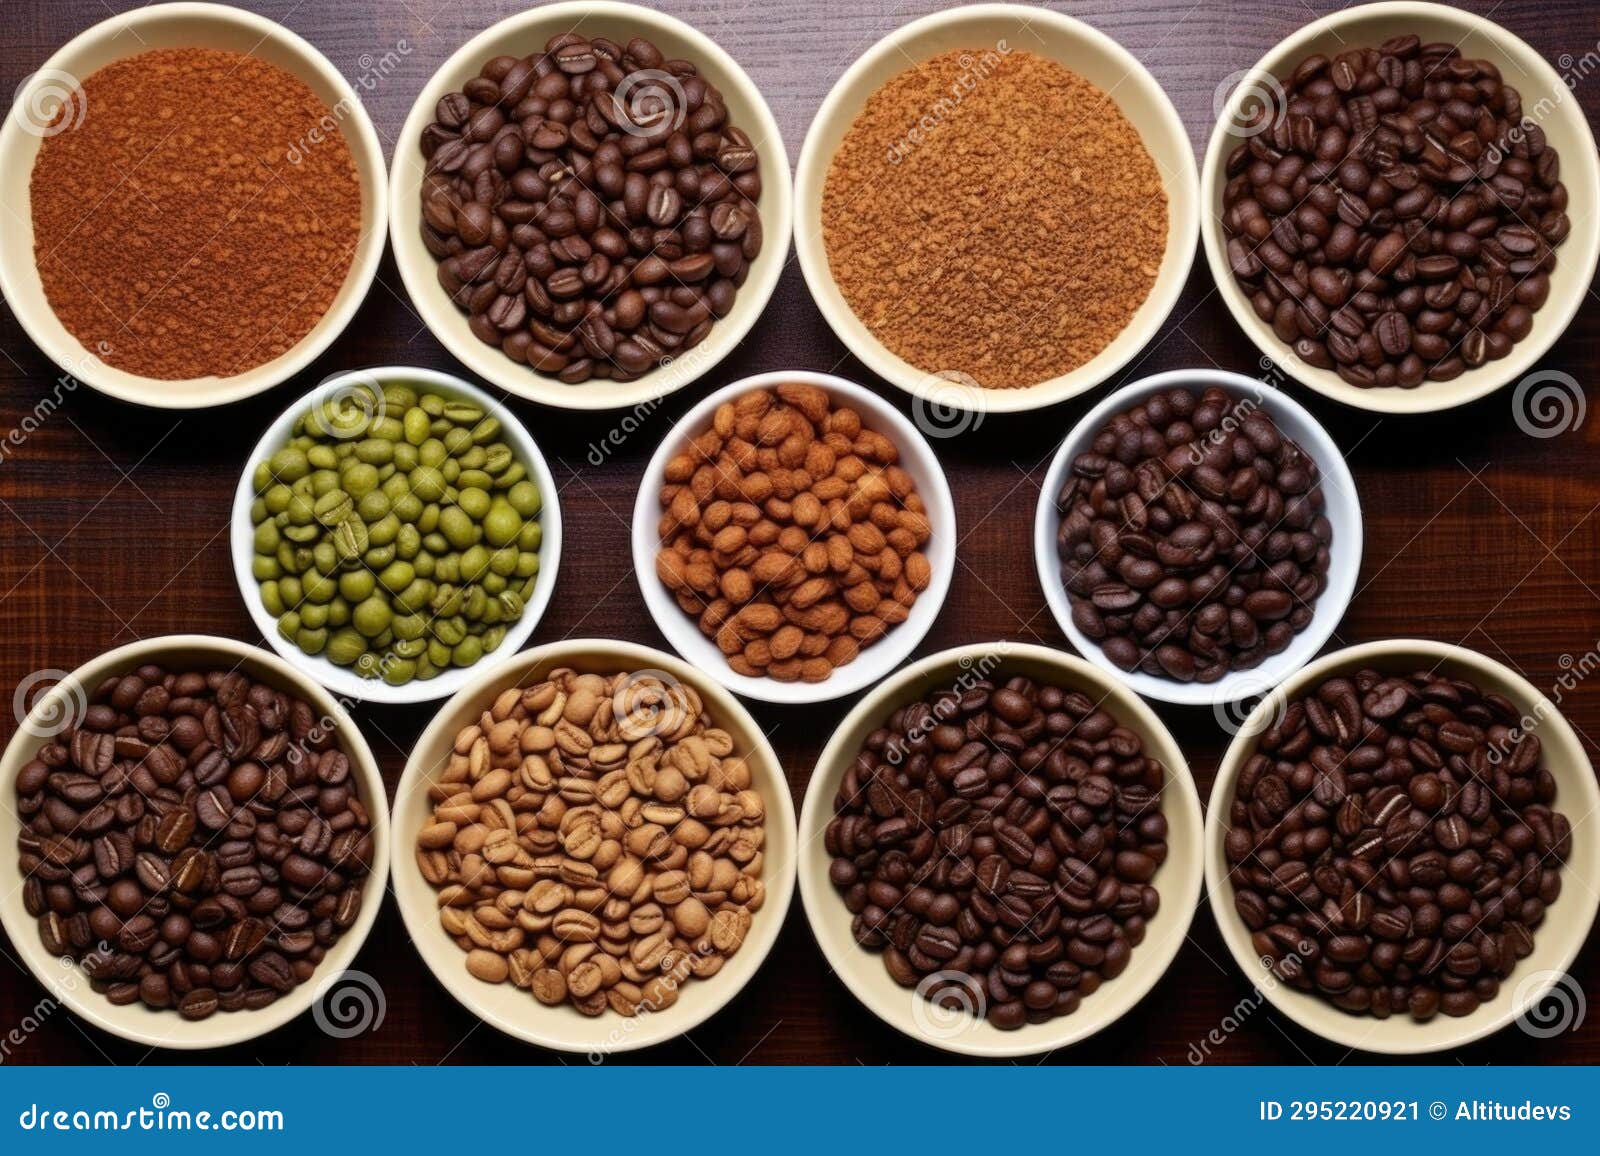 A Neat Presentation of Different Stages of Coffee Beans Stock Image ...